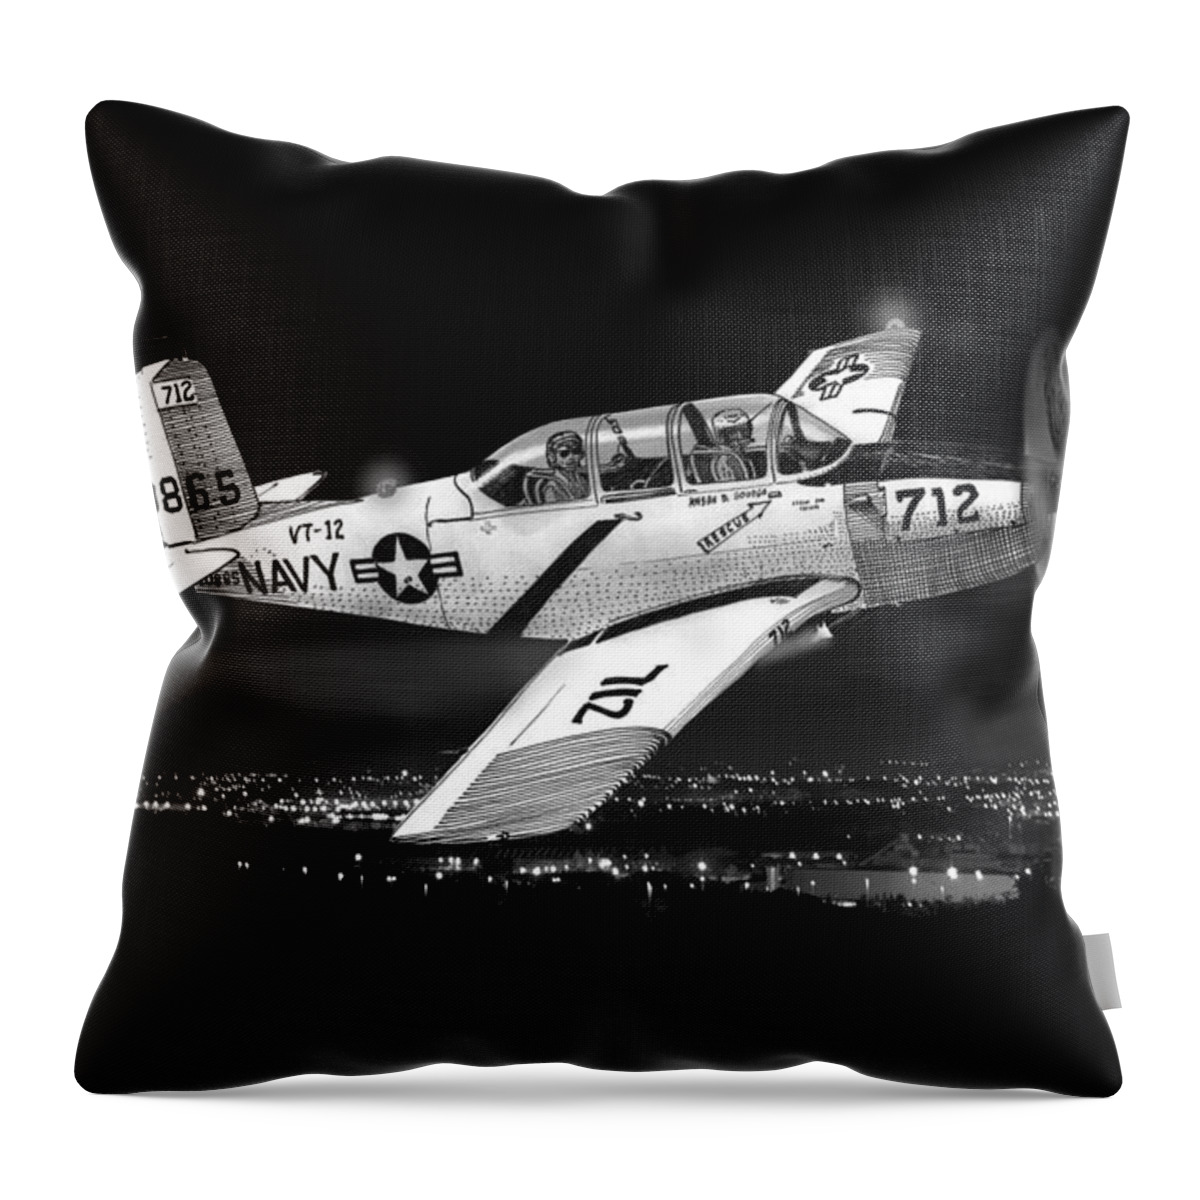 The 1951 Beechcraft T-34 Mentor Is A Propeller Throw Pillow featuring the painting Night Vision Beechcraft T-34 Mentor Military Training Airplane by Jack Pumphrey